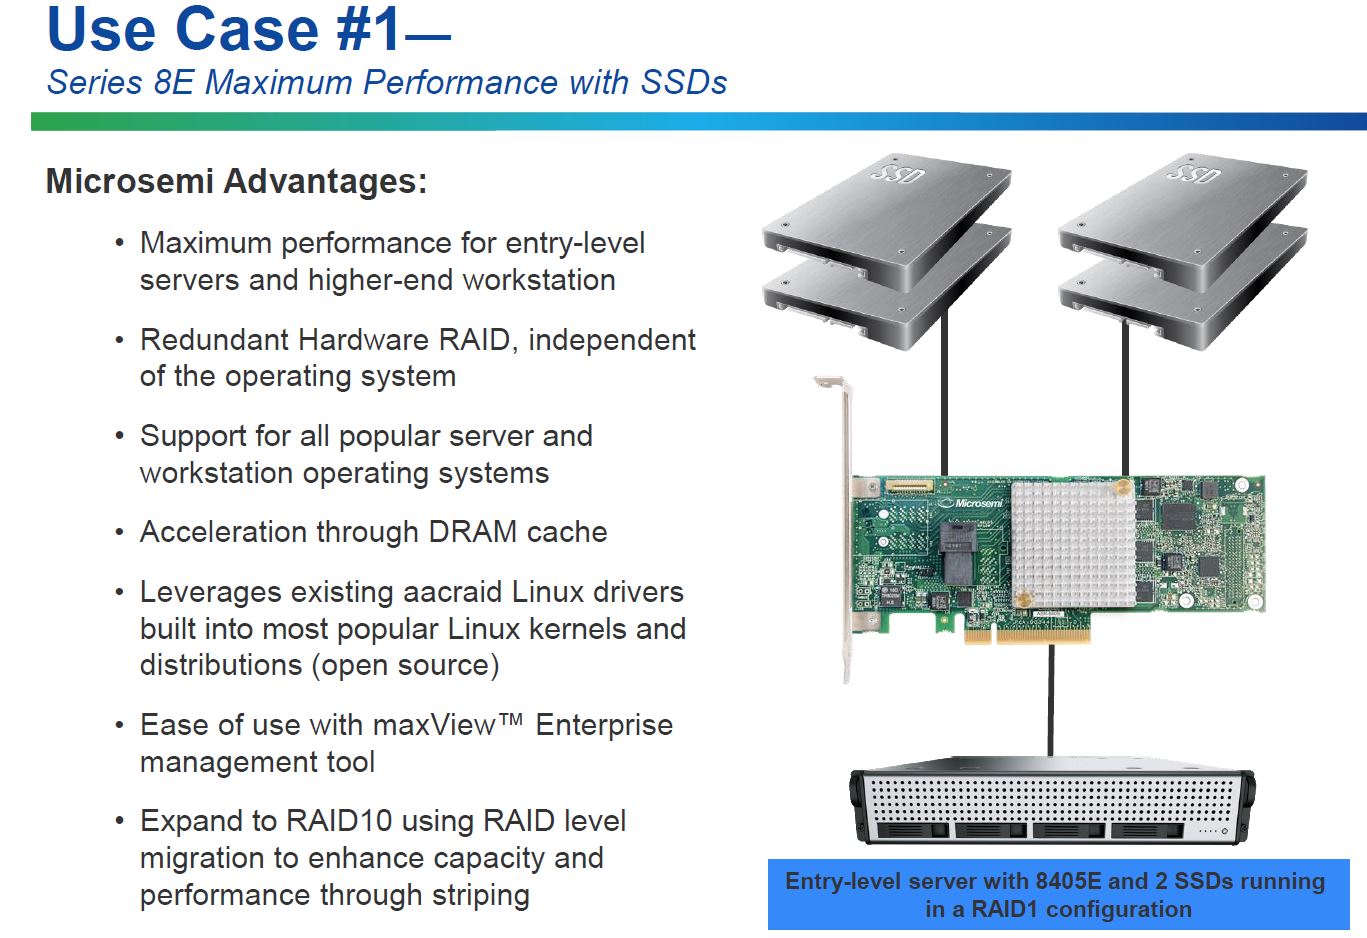 Microsemi 8 Series Adapters Overview